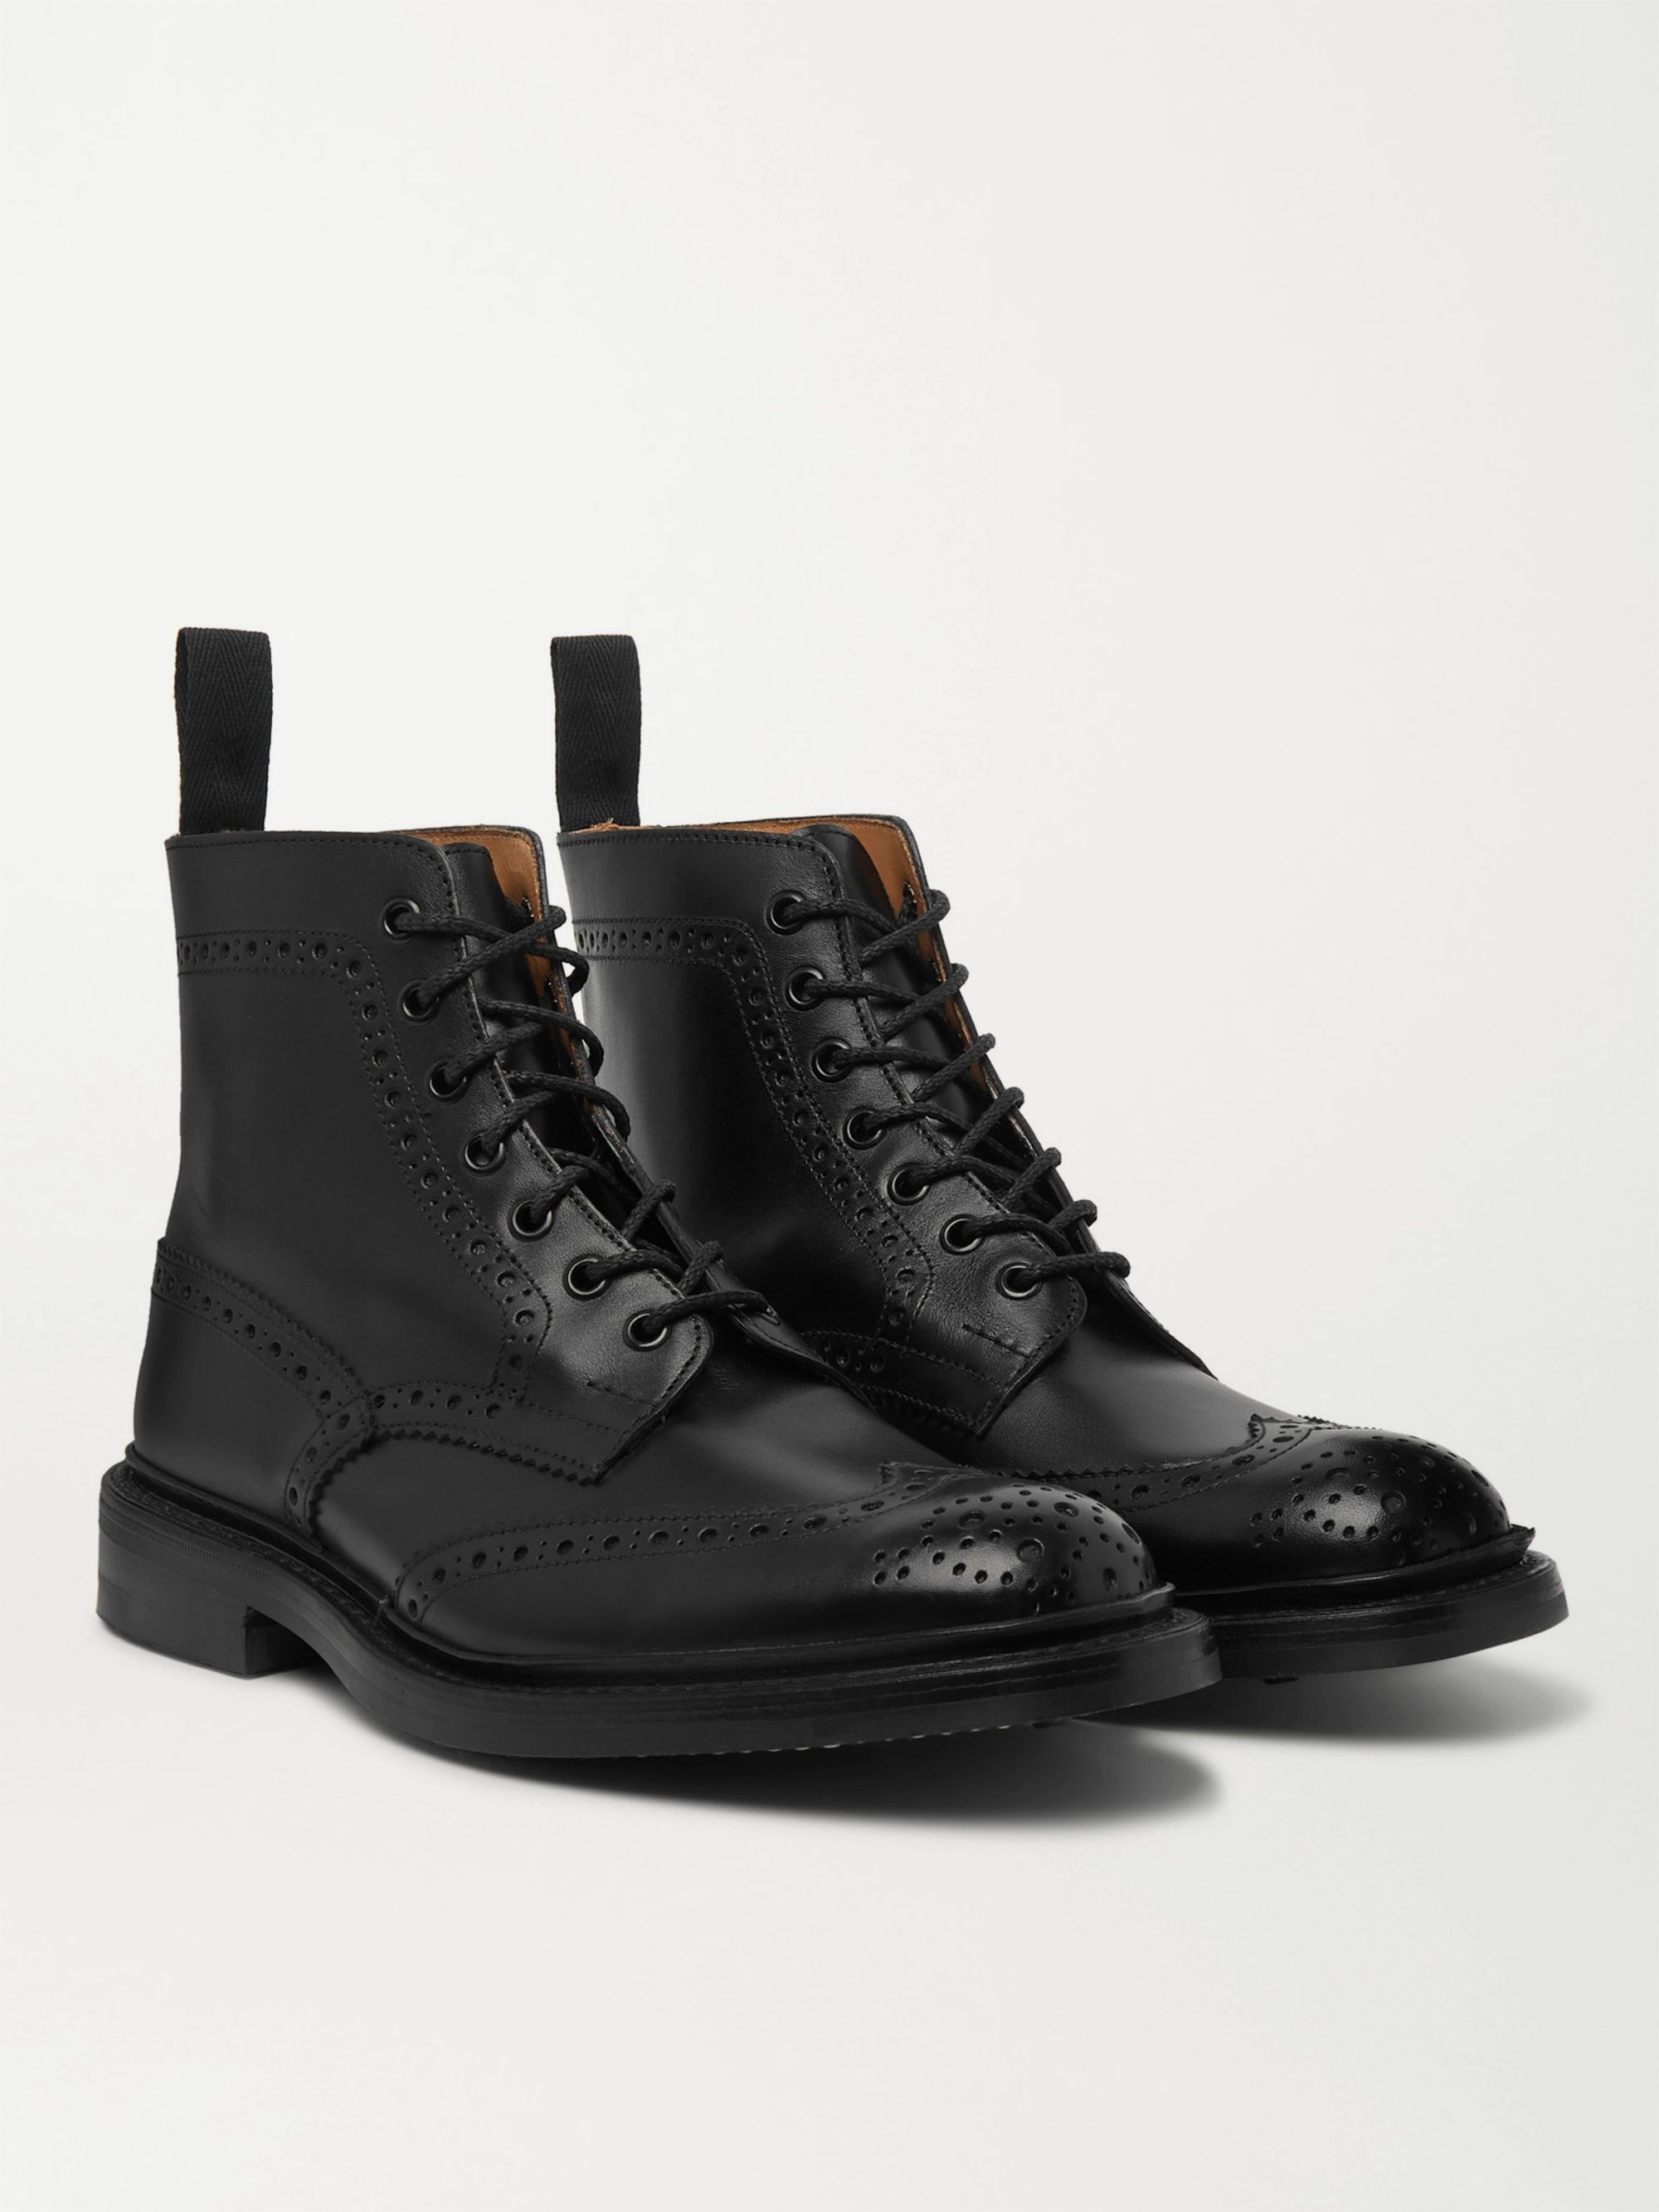 trickers black boots